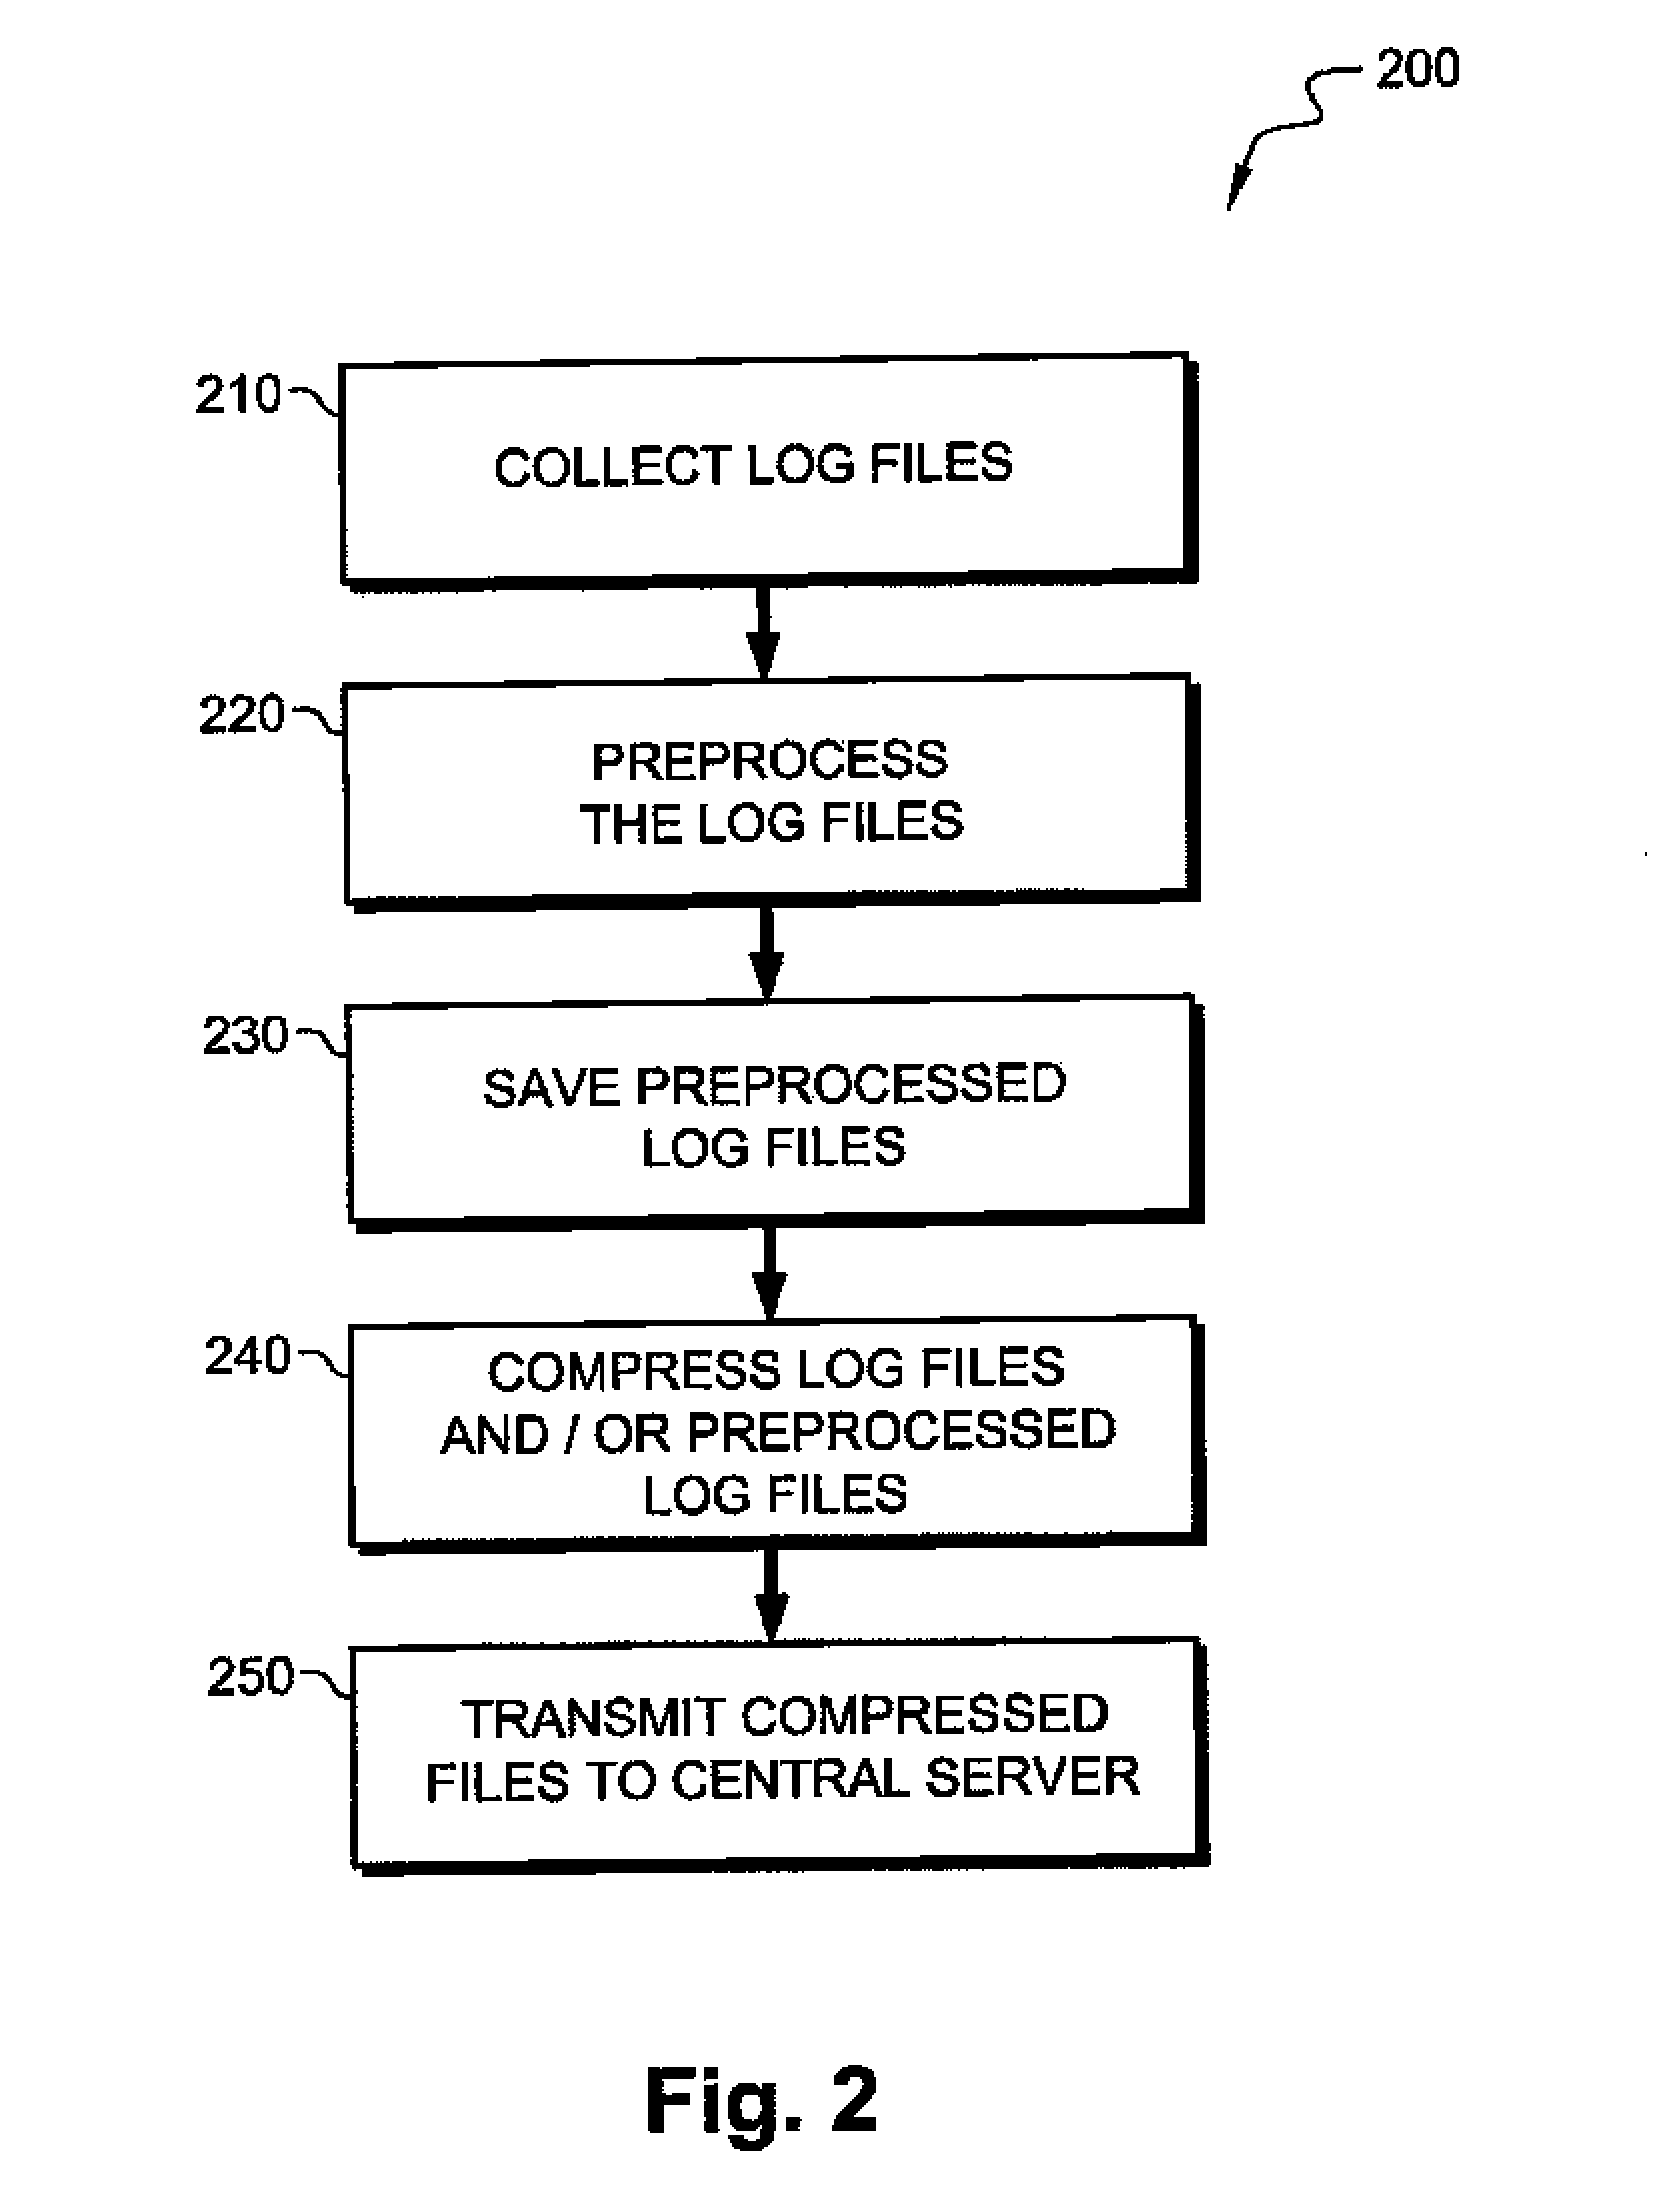 System and Method for Collection and Analysis of Server Log Files